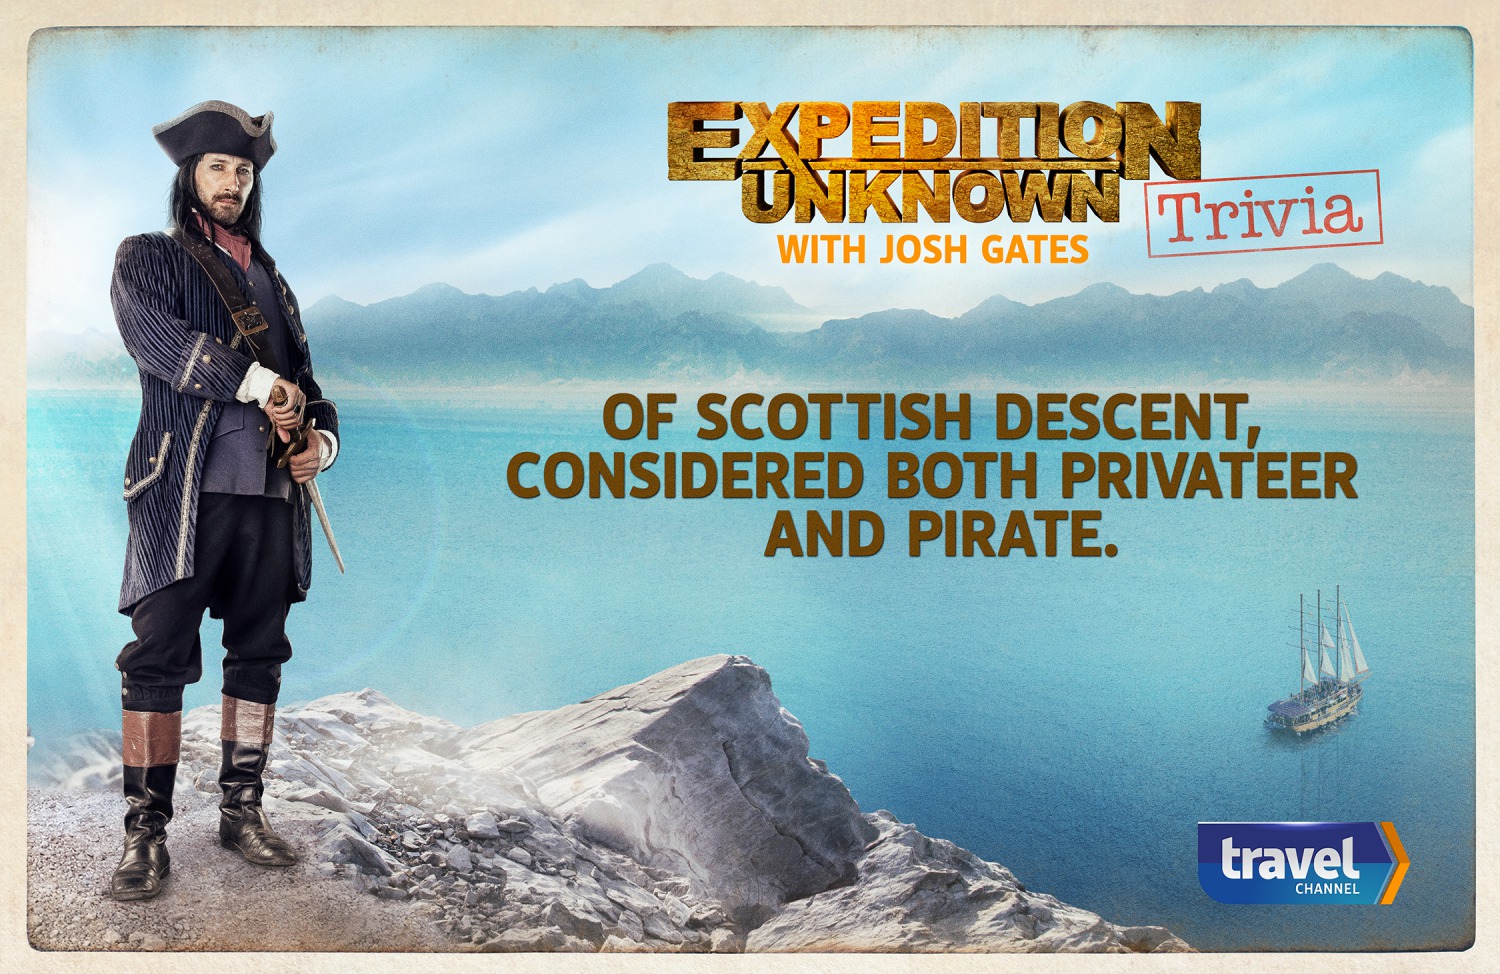 Extra Large TV Poster Image for Expedition Unknown (#17 of 27)